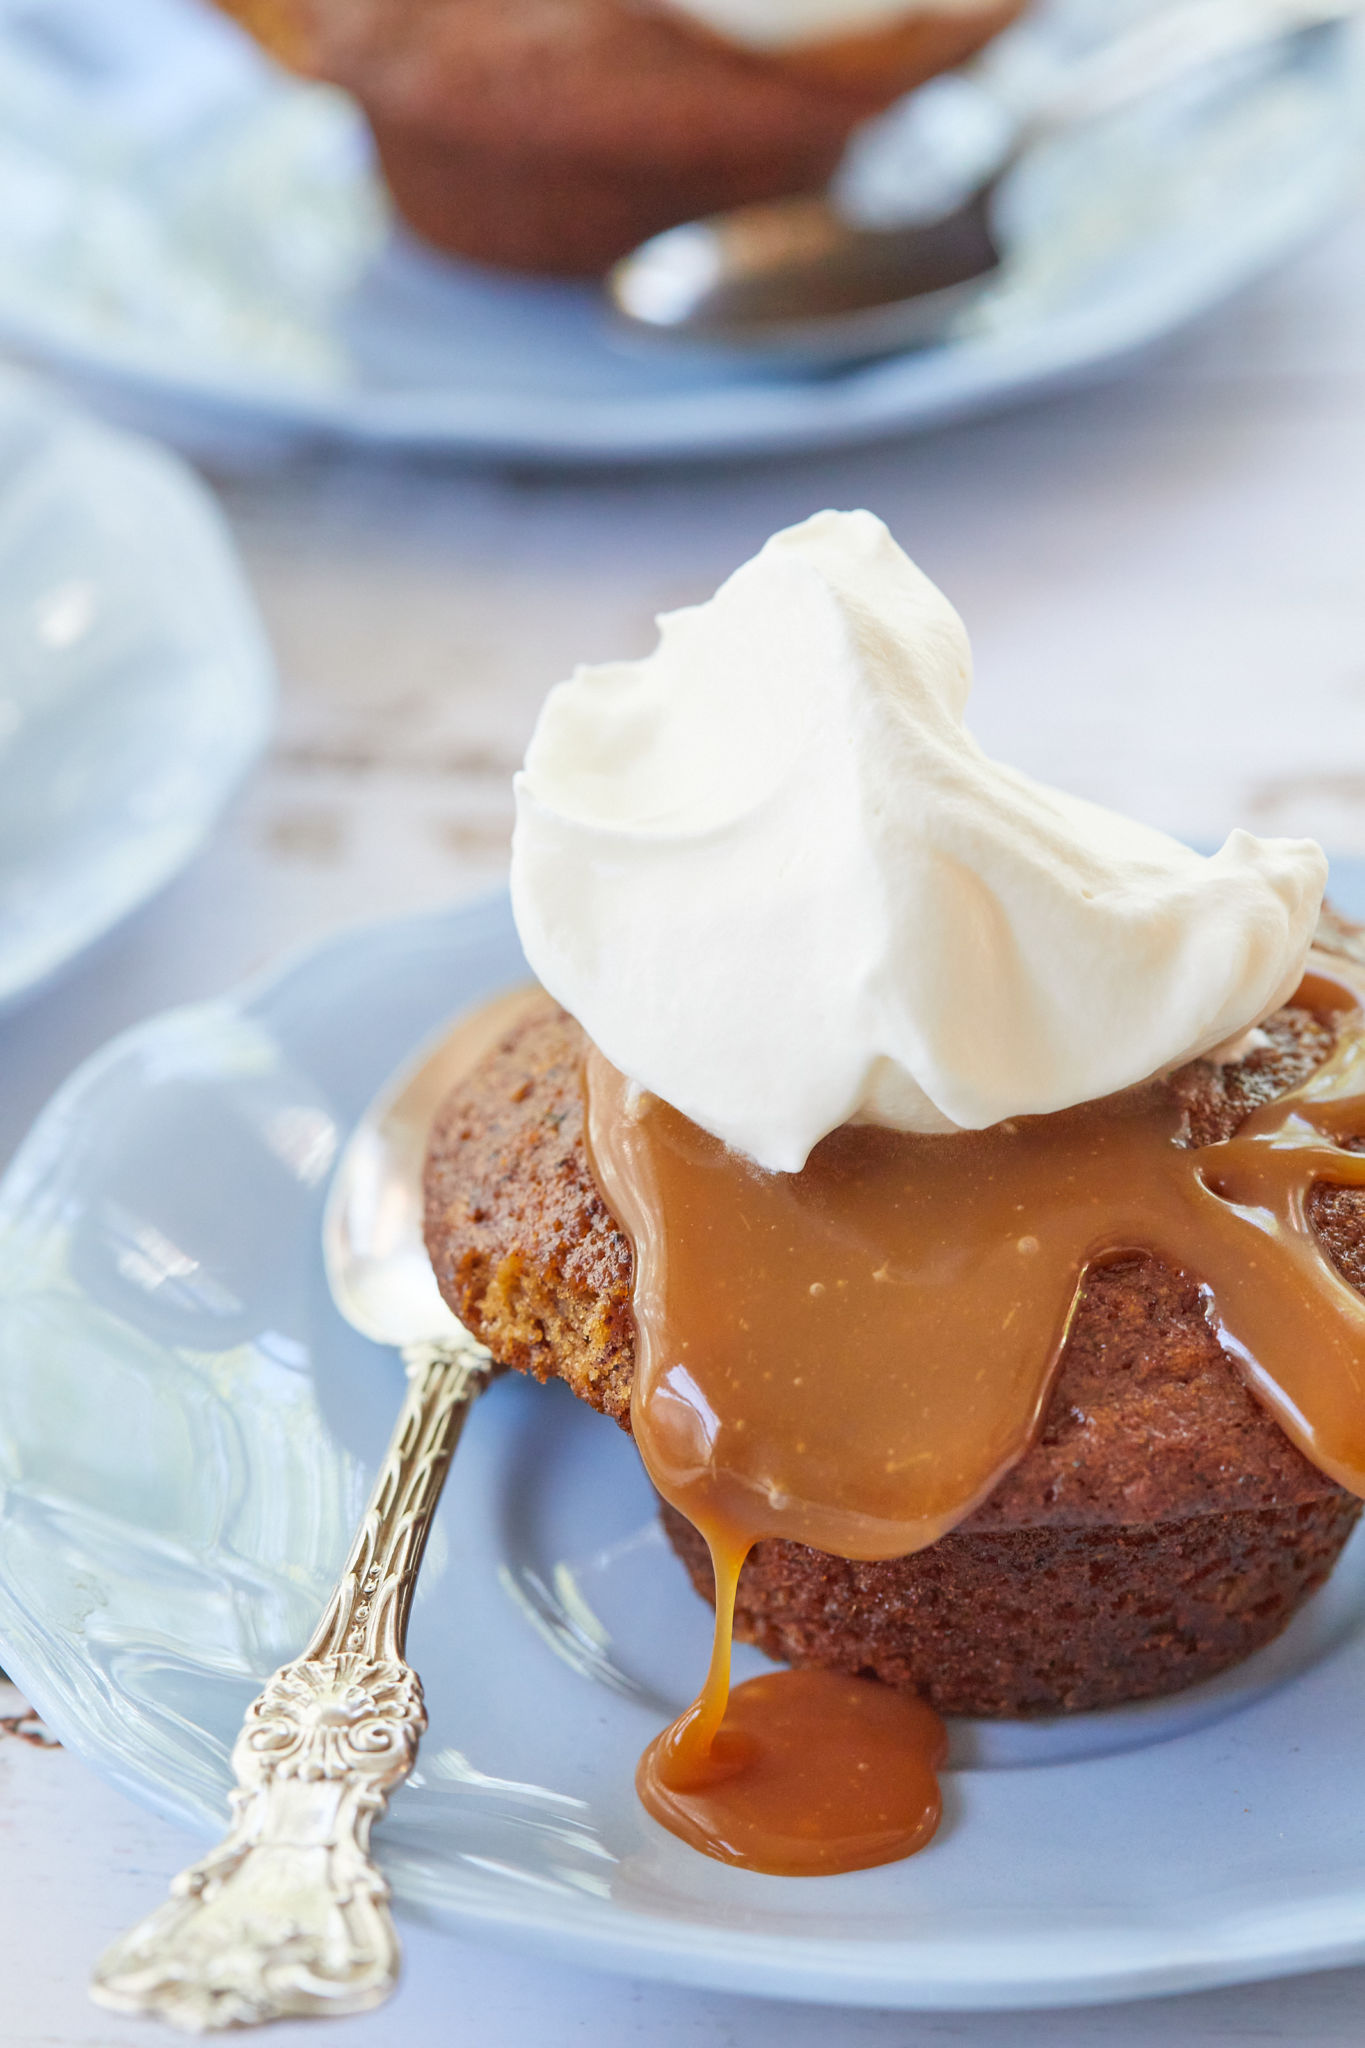 Sticky Toffee Pudding topped with caramel sauce and whipped cream on a blue dish with a spoon.